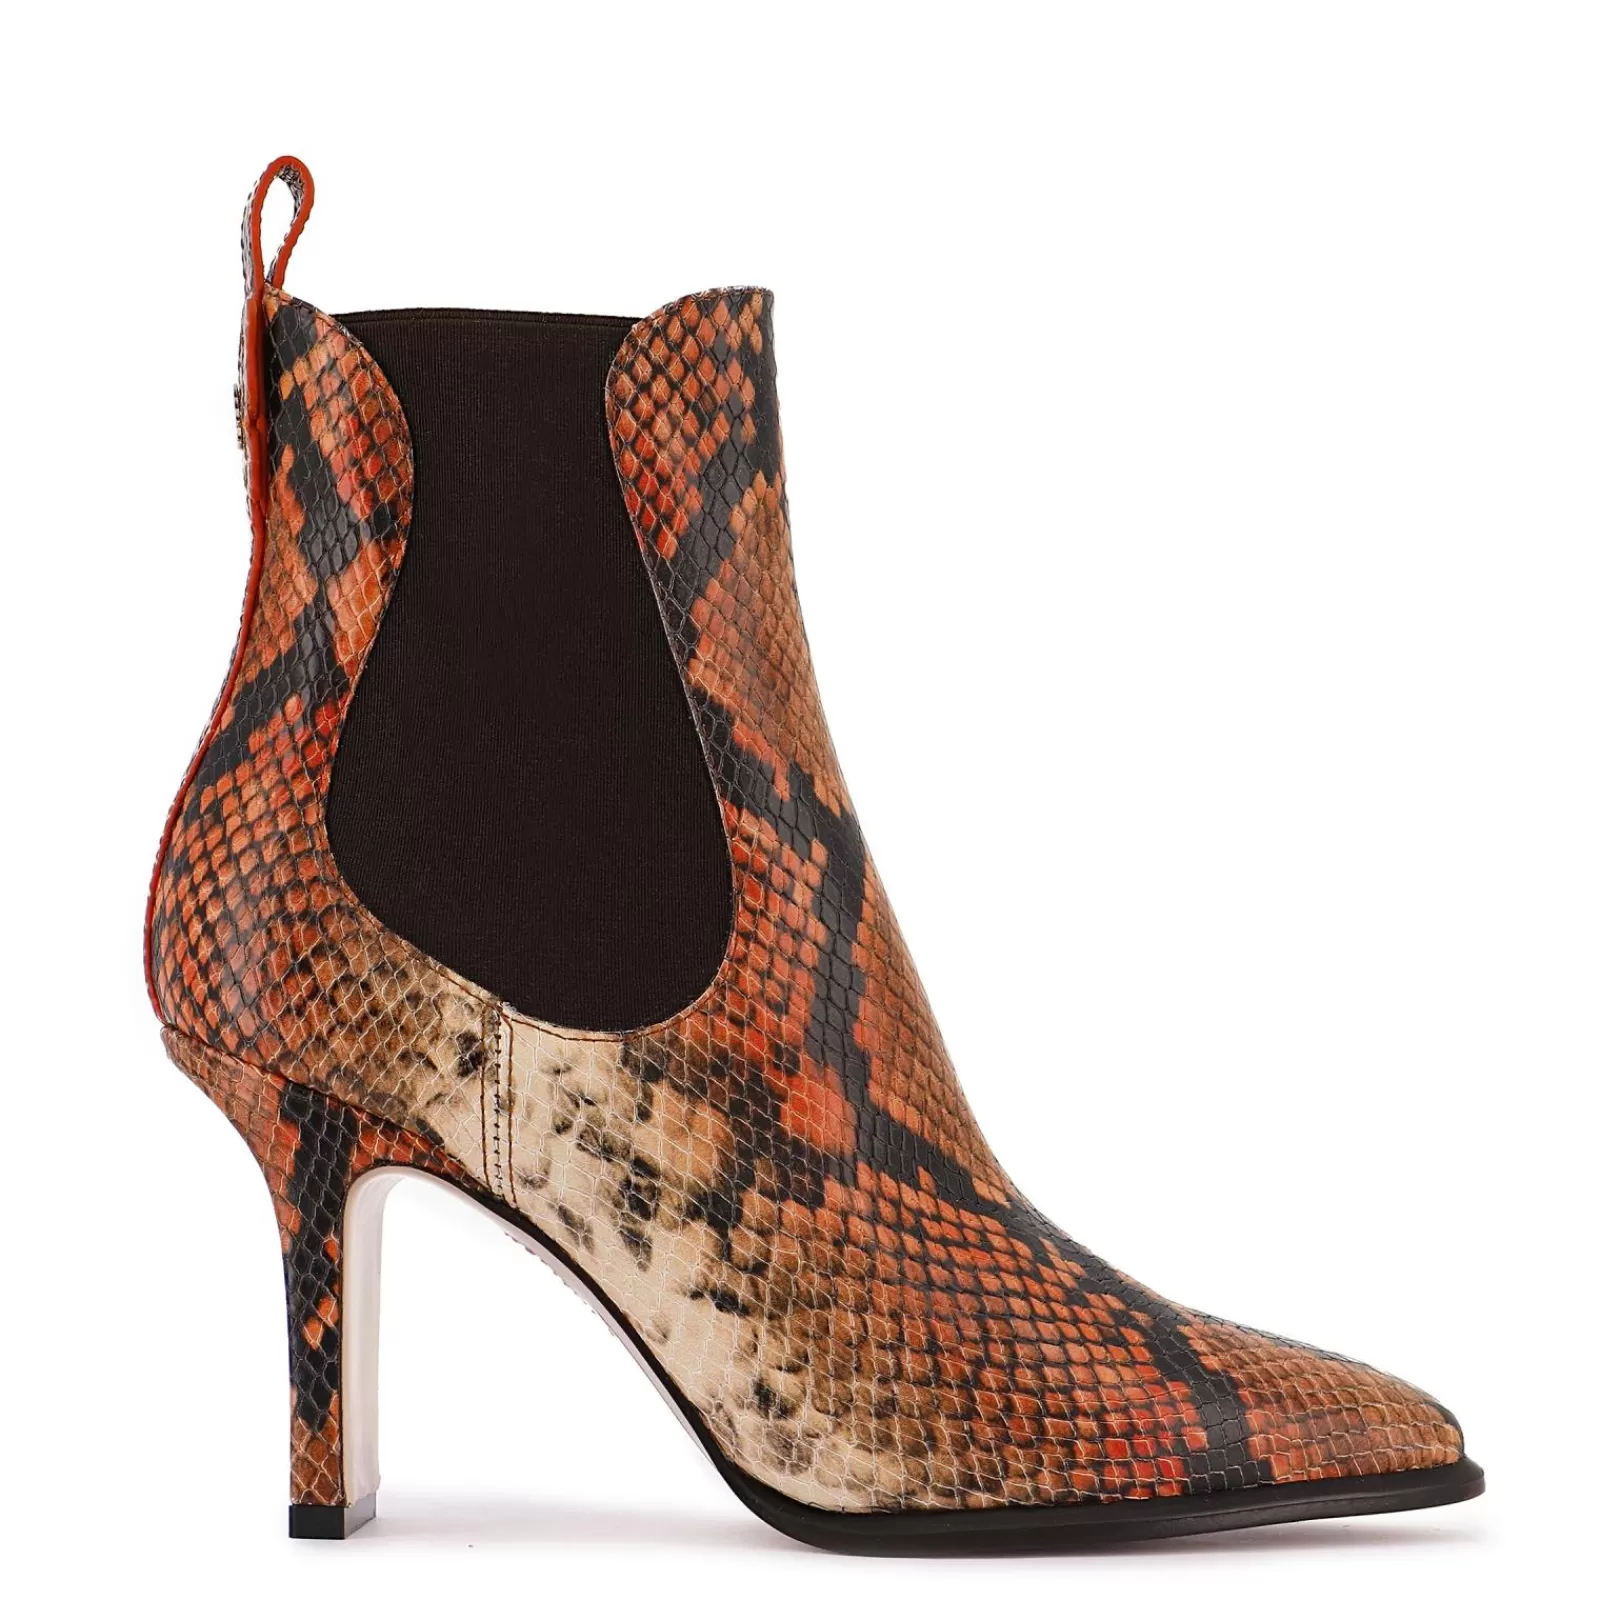 Sophia Webster Allegra Mid Ankle Boot^ BOOTS